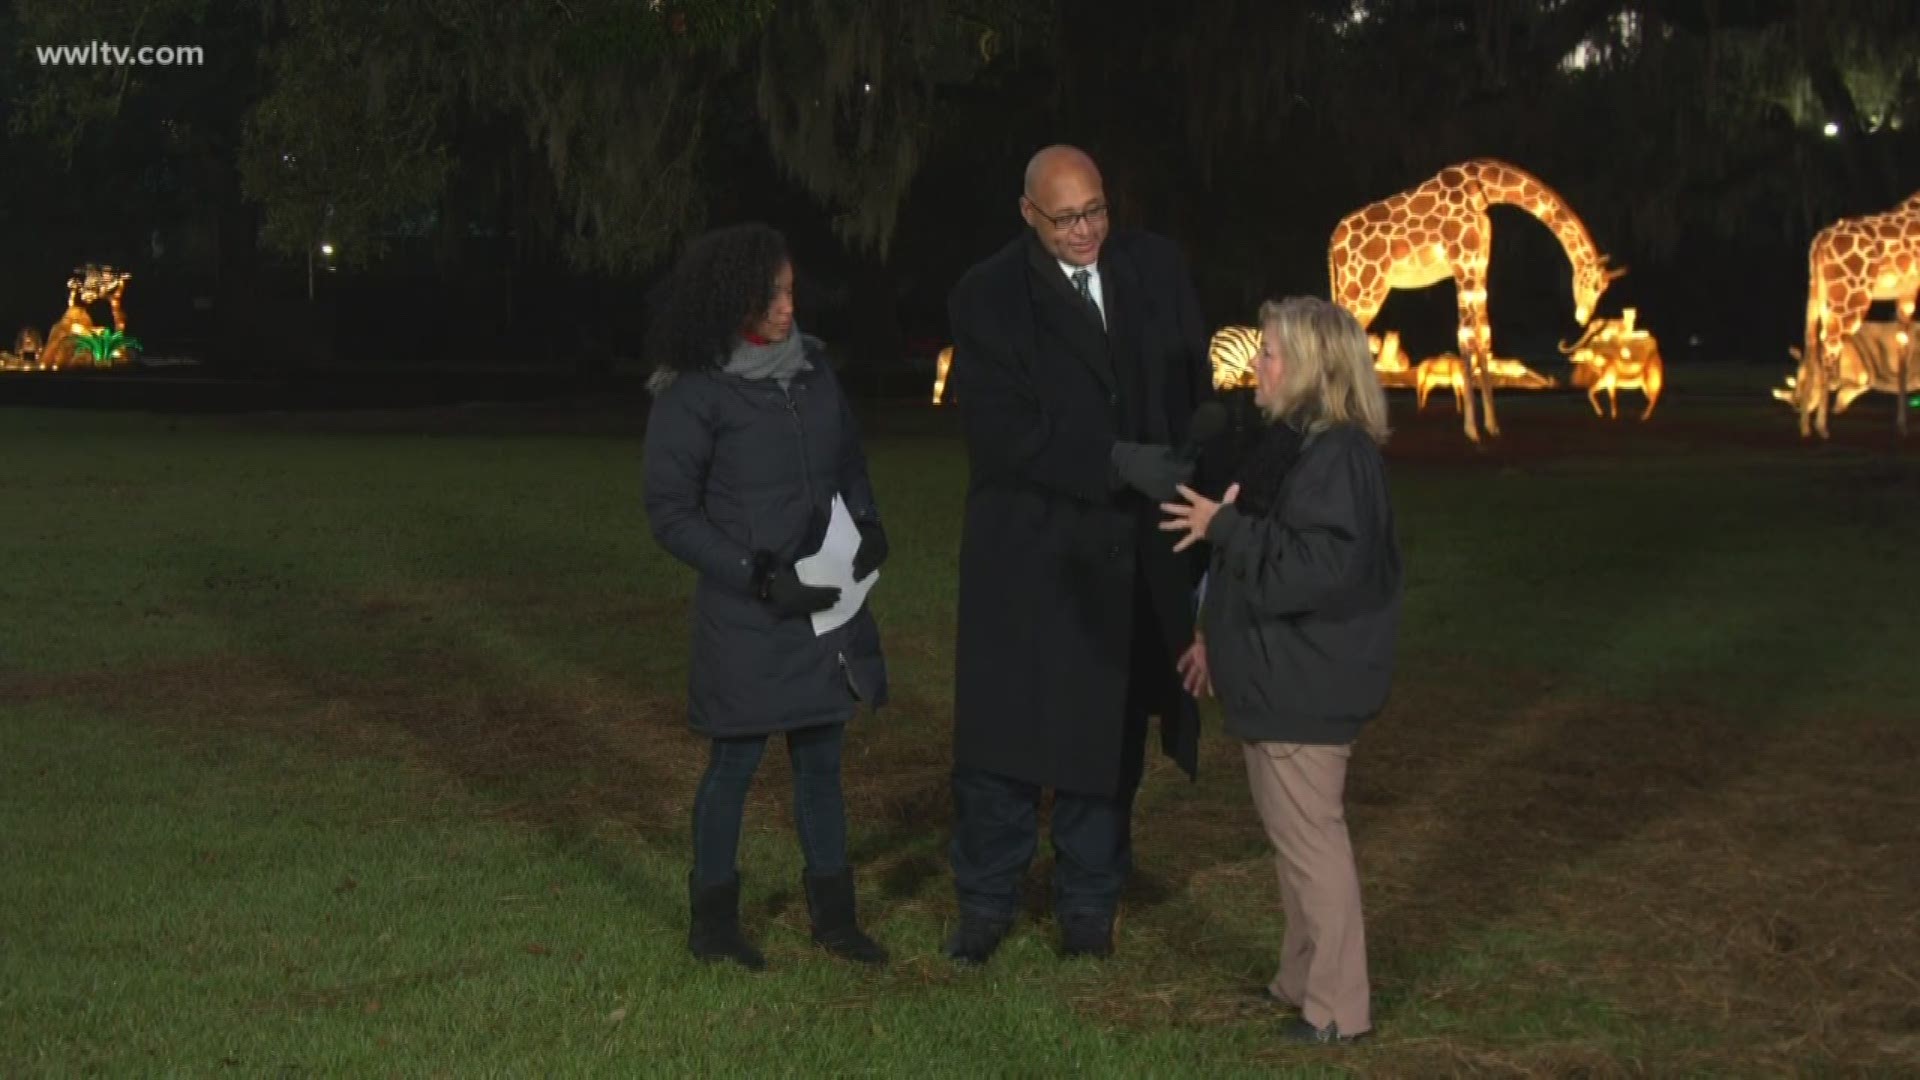 Audubon Institute's Brenda Walkenhorst gives a preview of Zoo Lights, the new holiday attraction at Audubon Zoo.